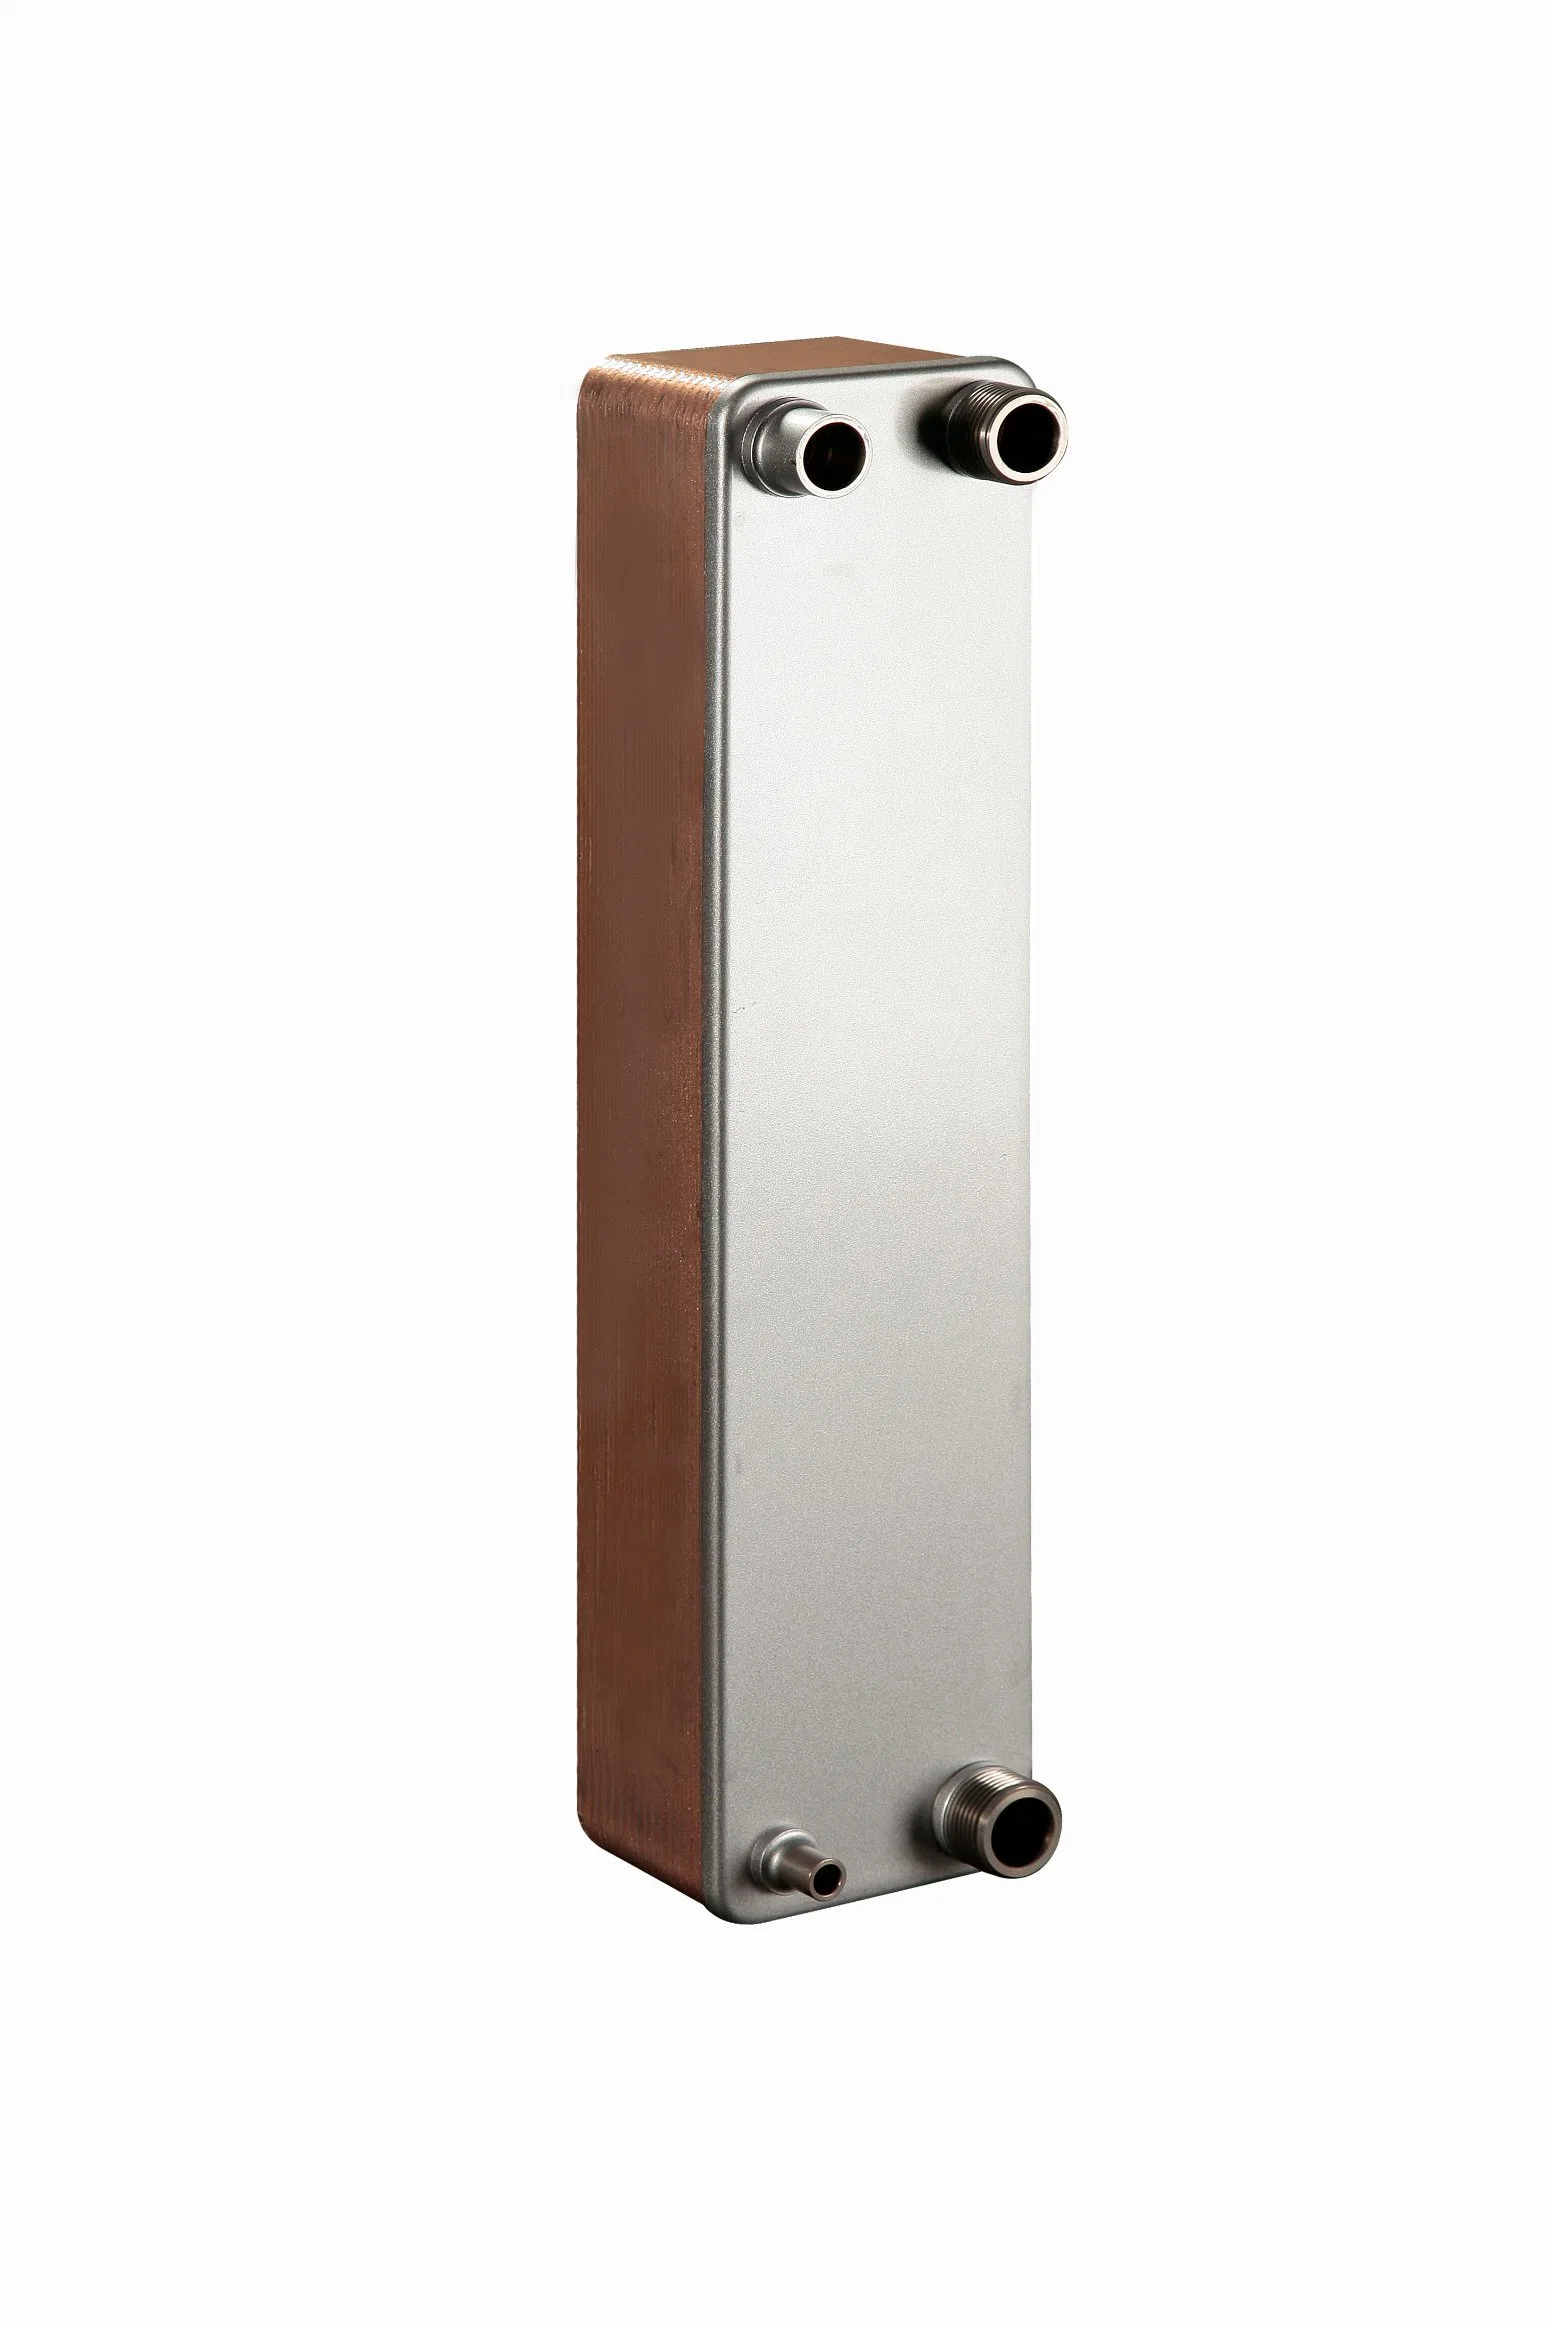 Brazed Type Heat Exchanger for Heating in Industry Use